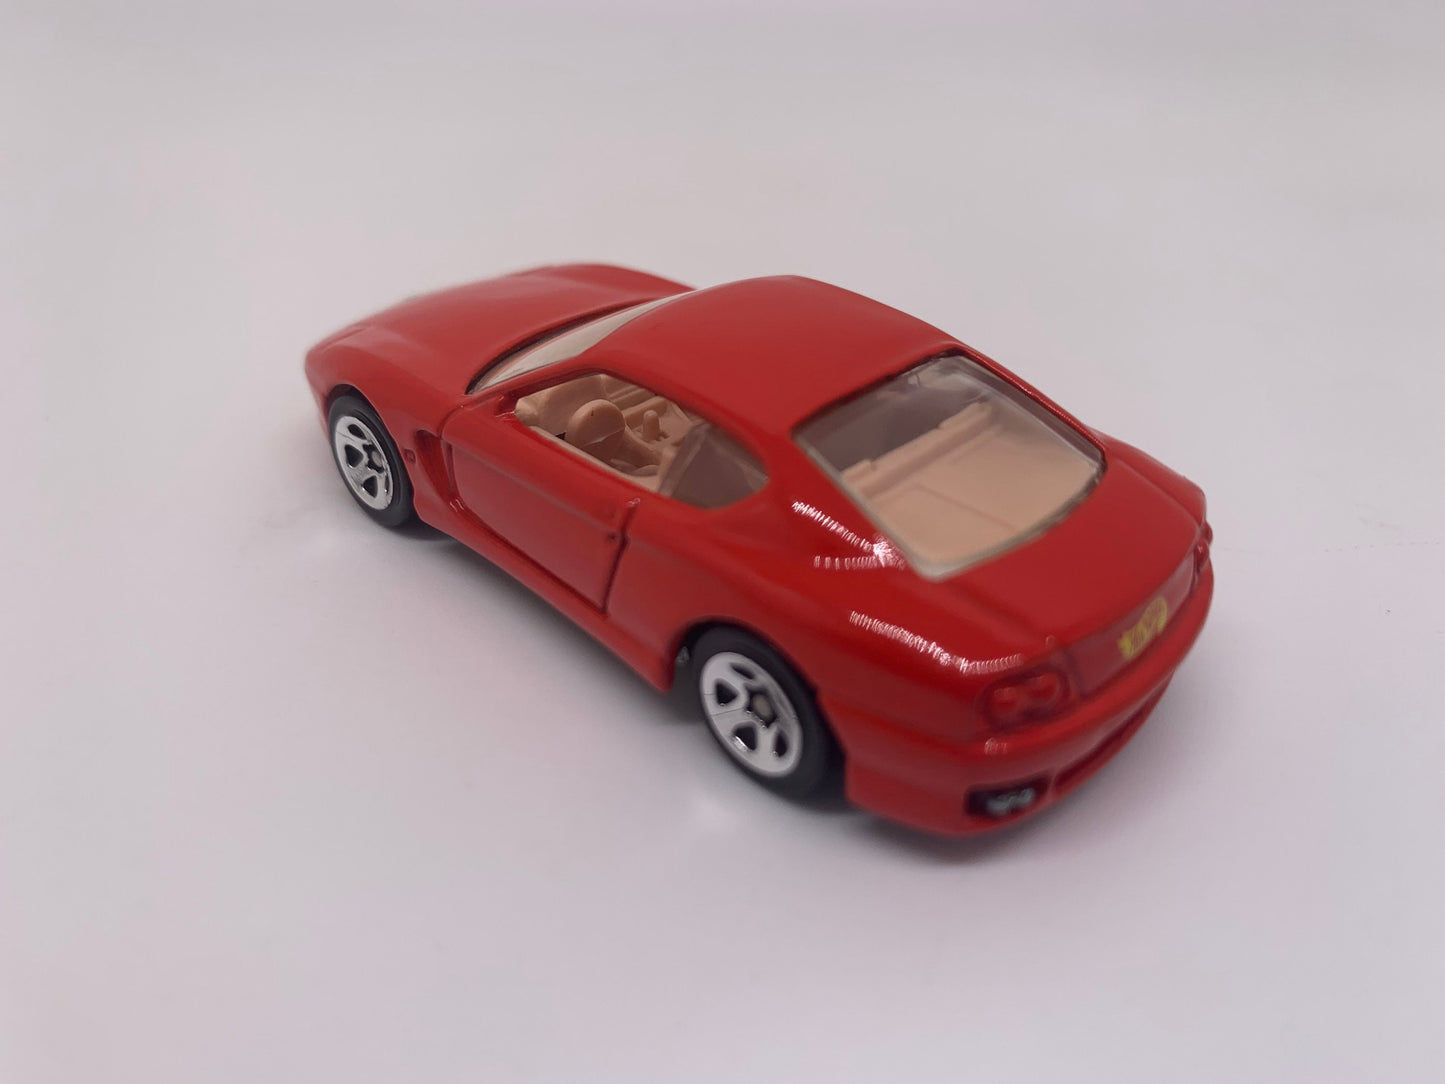 Hot Wheels Ferrari 456M Red 1999 Hot Wheels Perfect Birthday Gift Miniature Collectable Model Toy Car